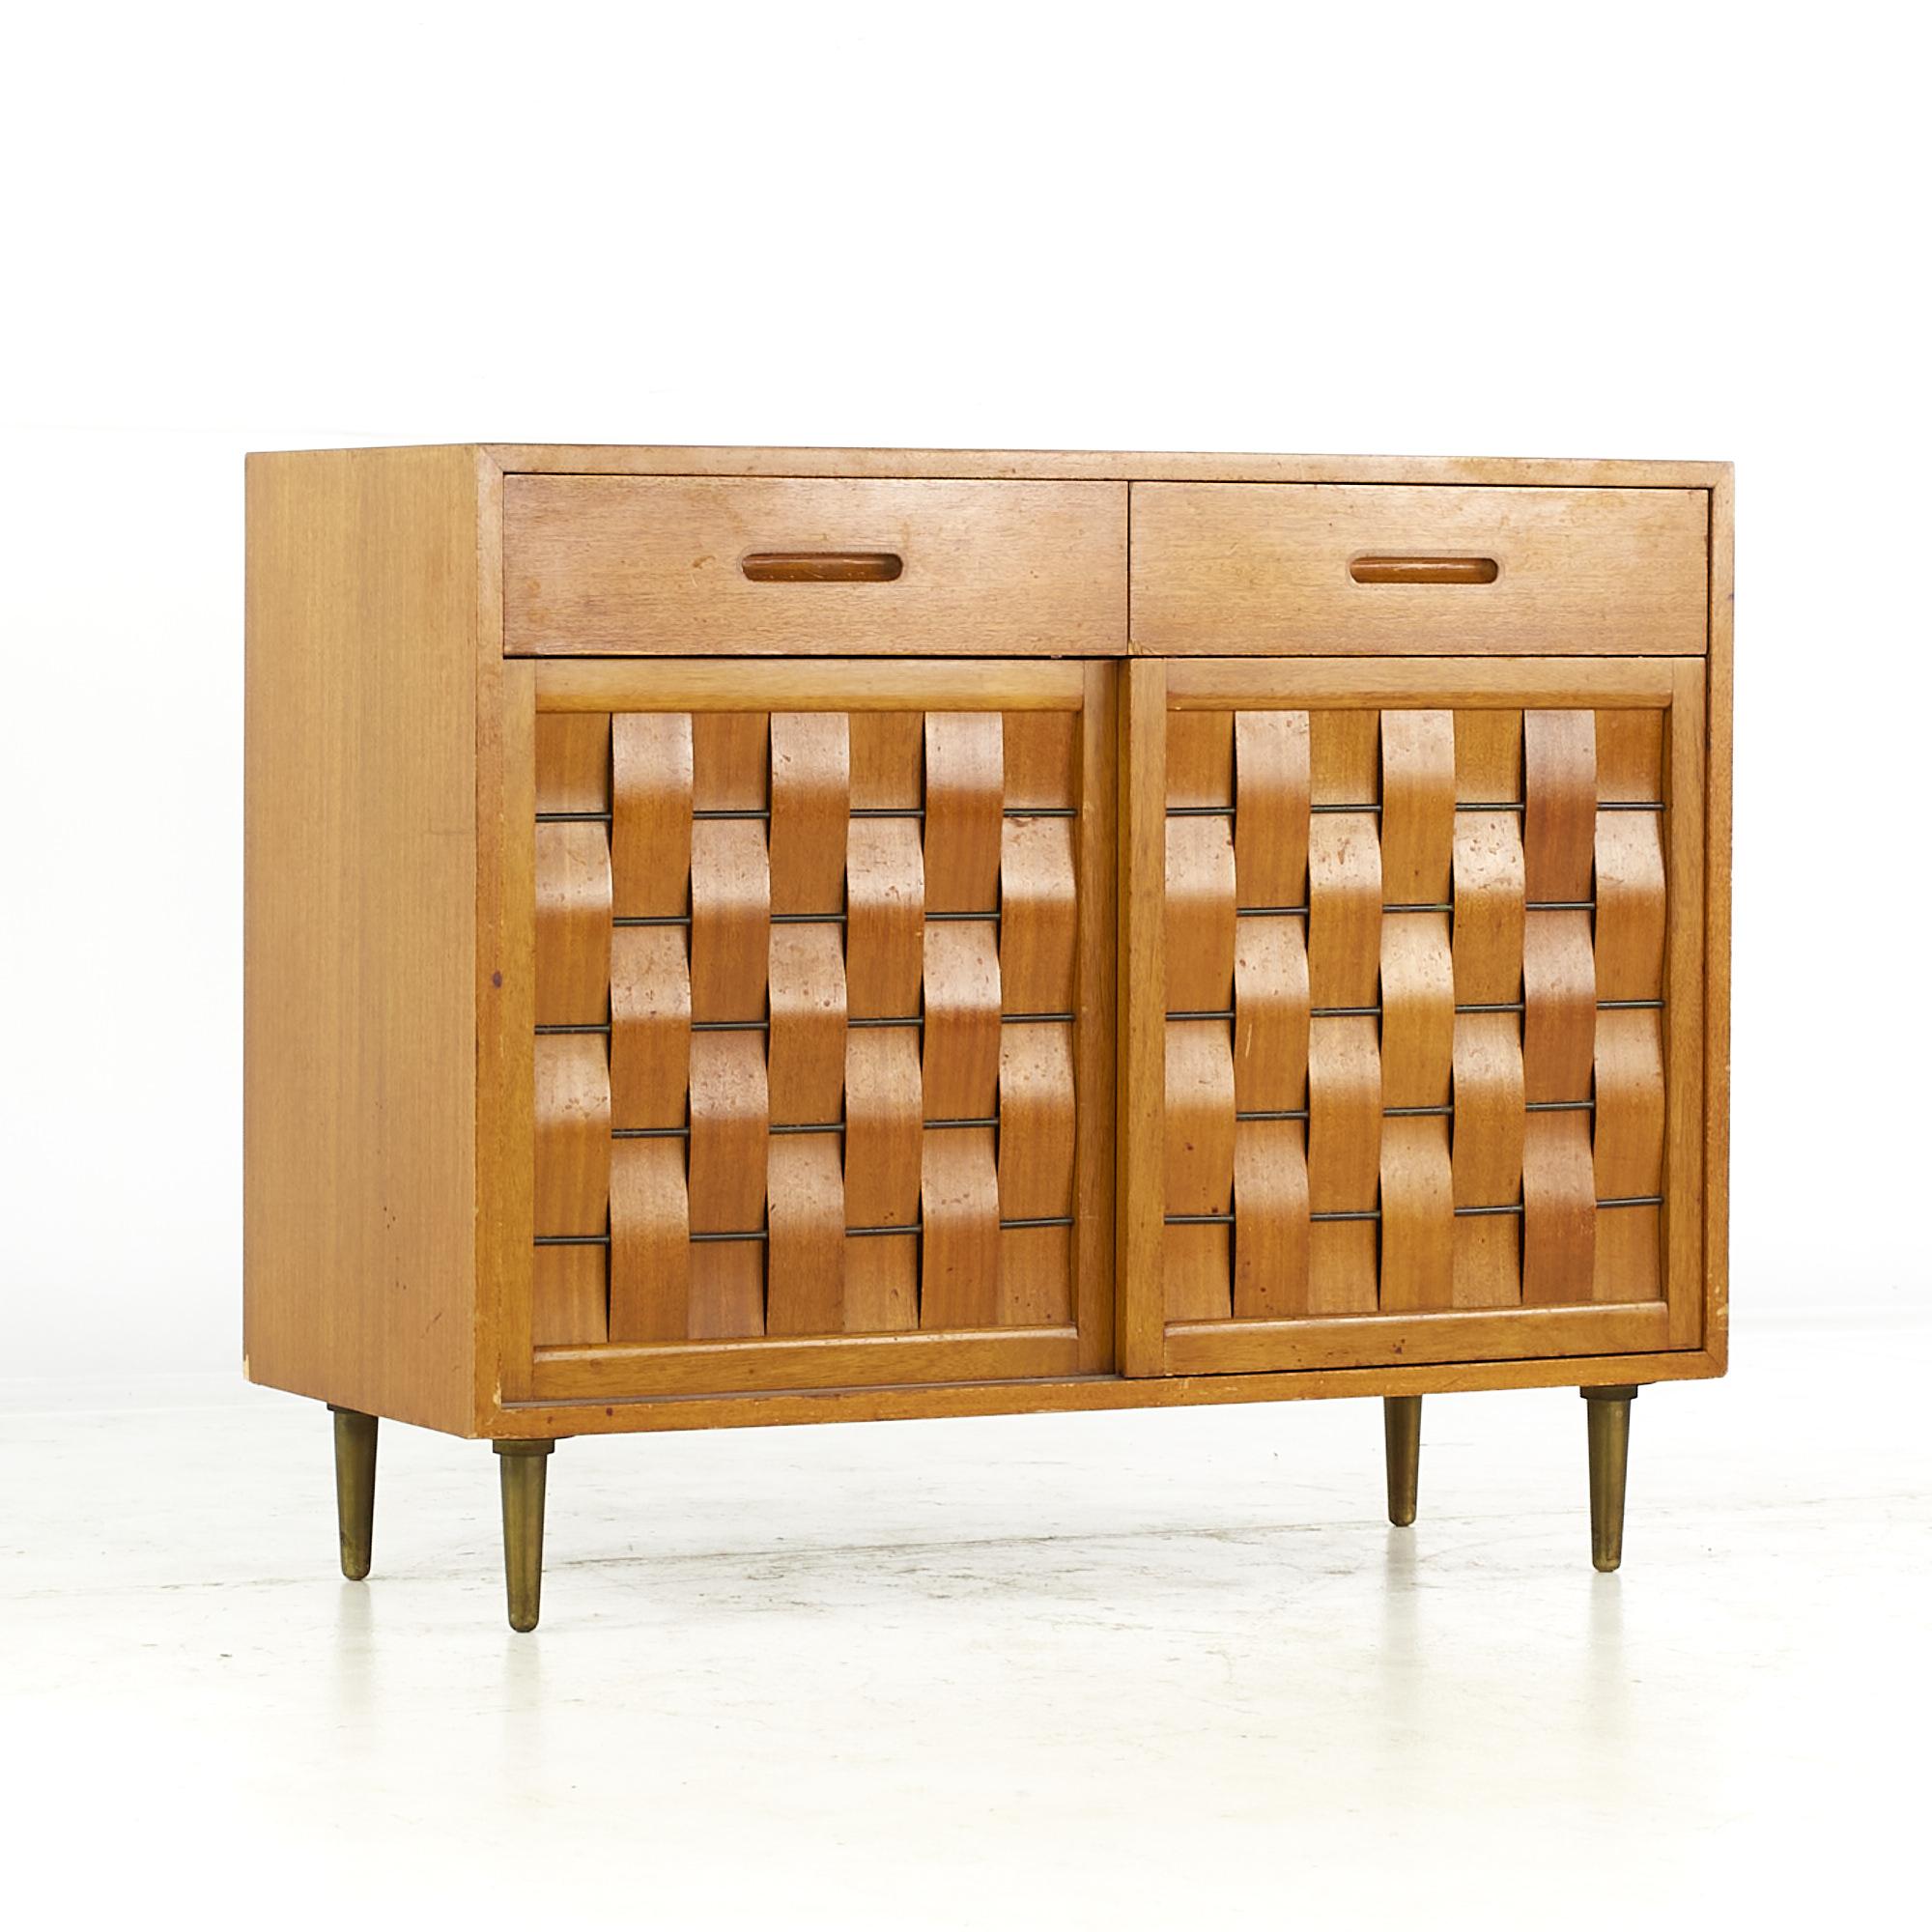 Edward Wormley for Dunbar Mcm Bleached Mahogany Sliding Door Credenza, Pair For Sale 1